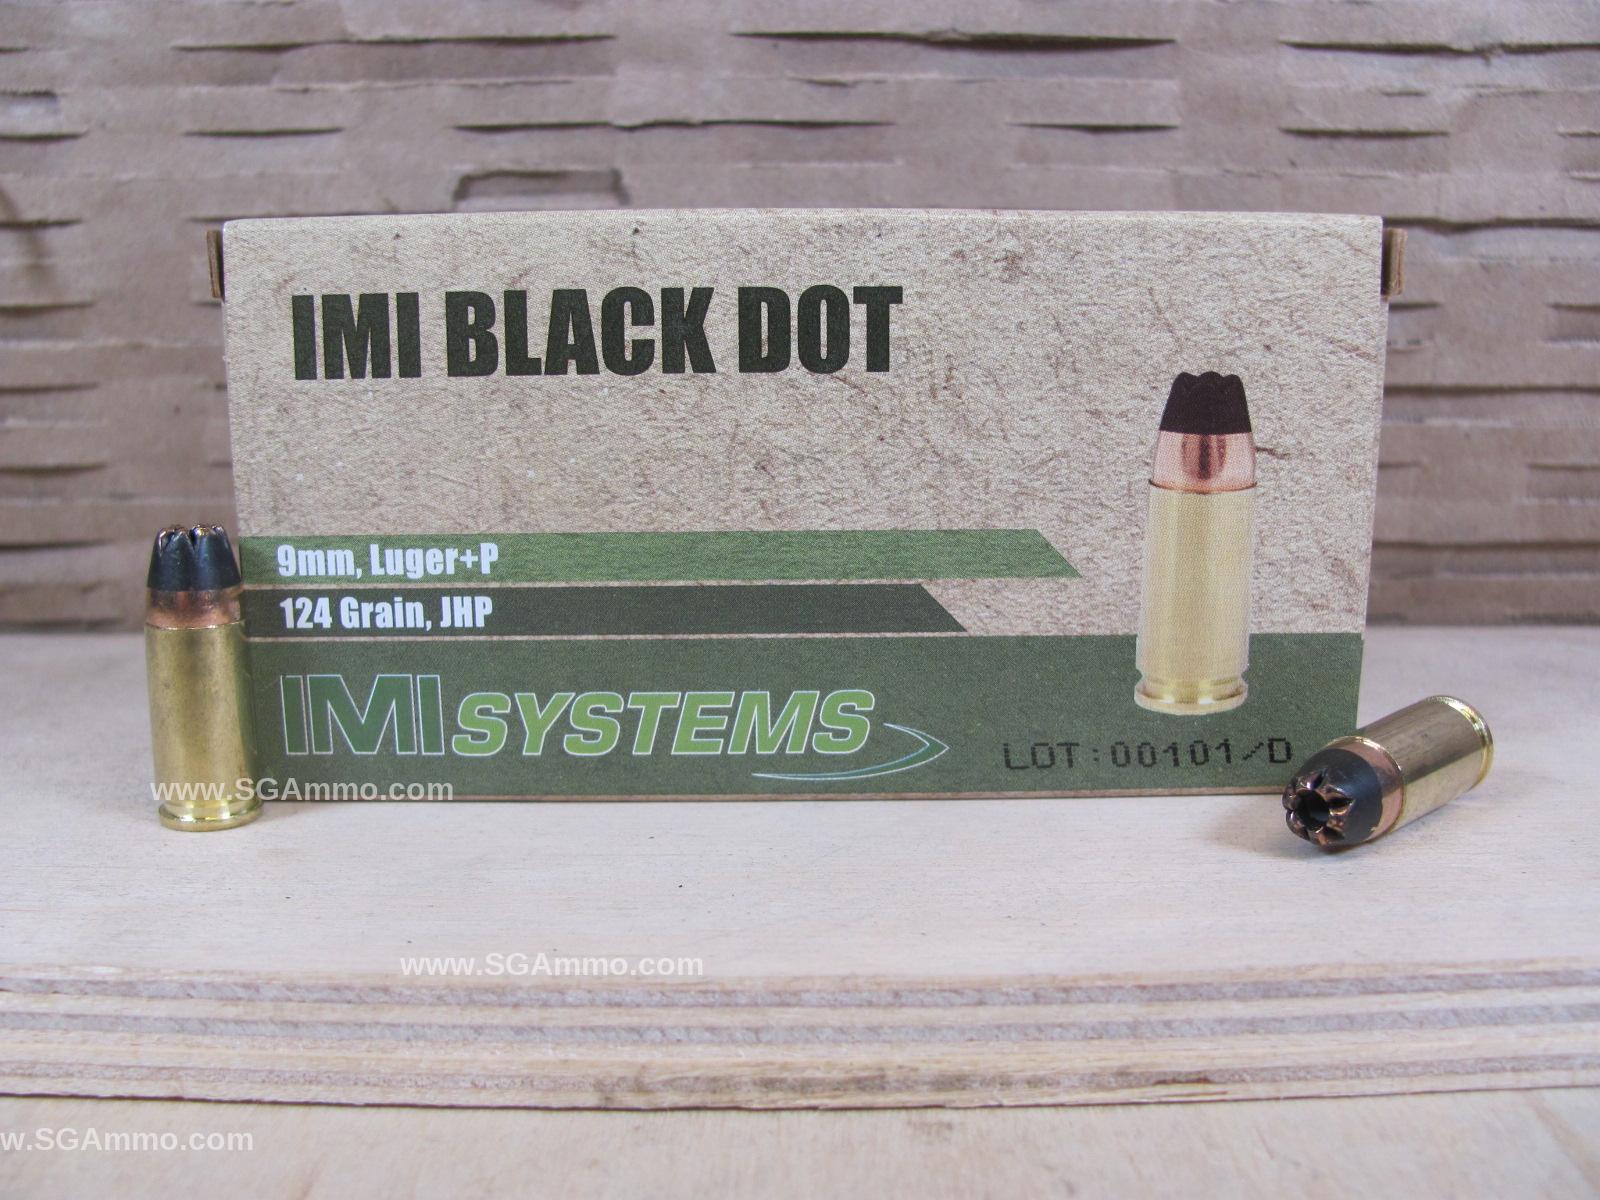 500 Round Plastic Can - 9mm Luger +P 124 Grain Di-Cut Jacketed Hollow Point Black Dot Ammo By IMI of Israel - Packed in Plastic Canister